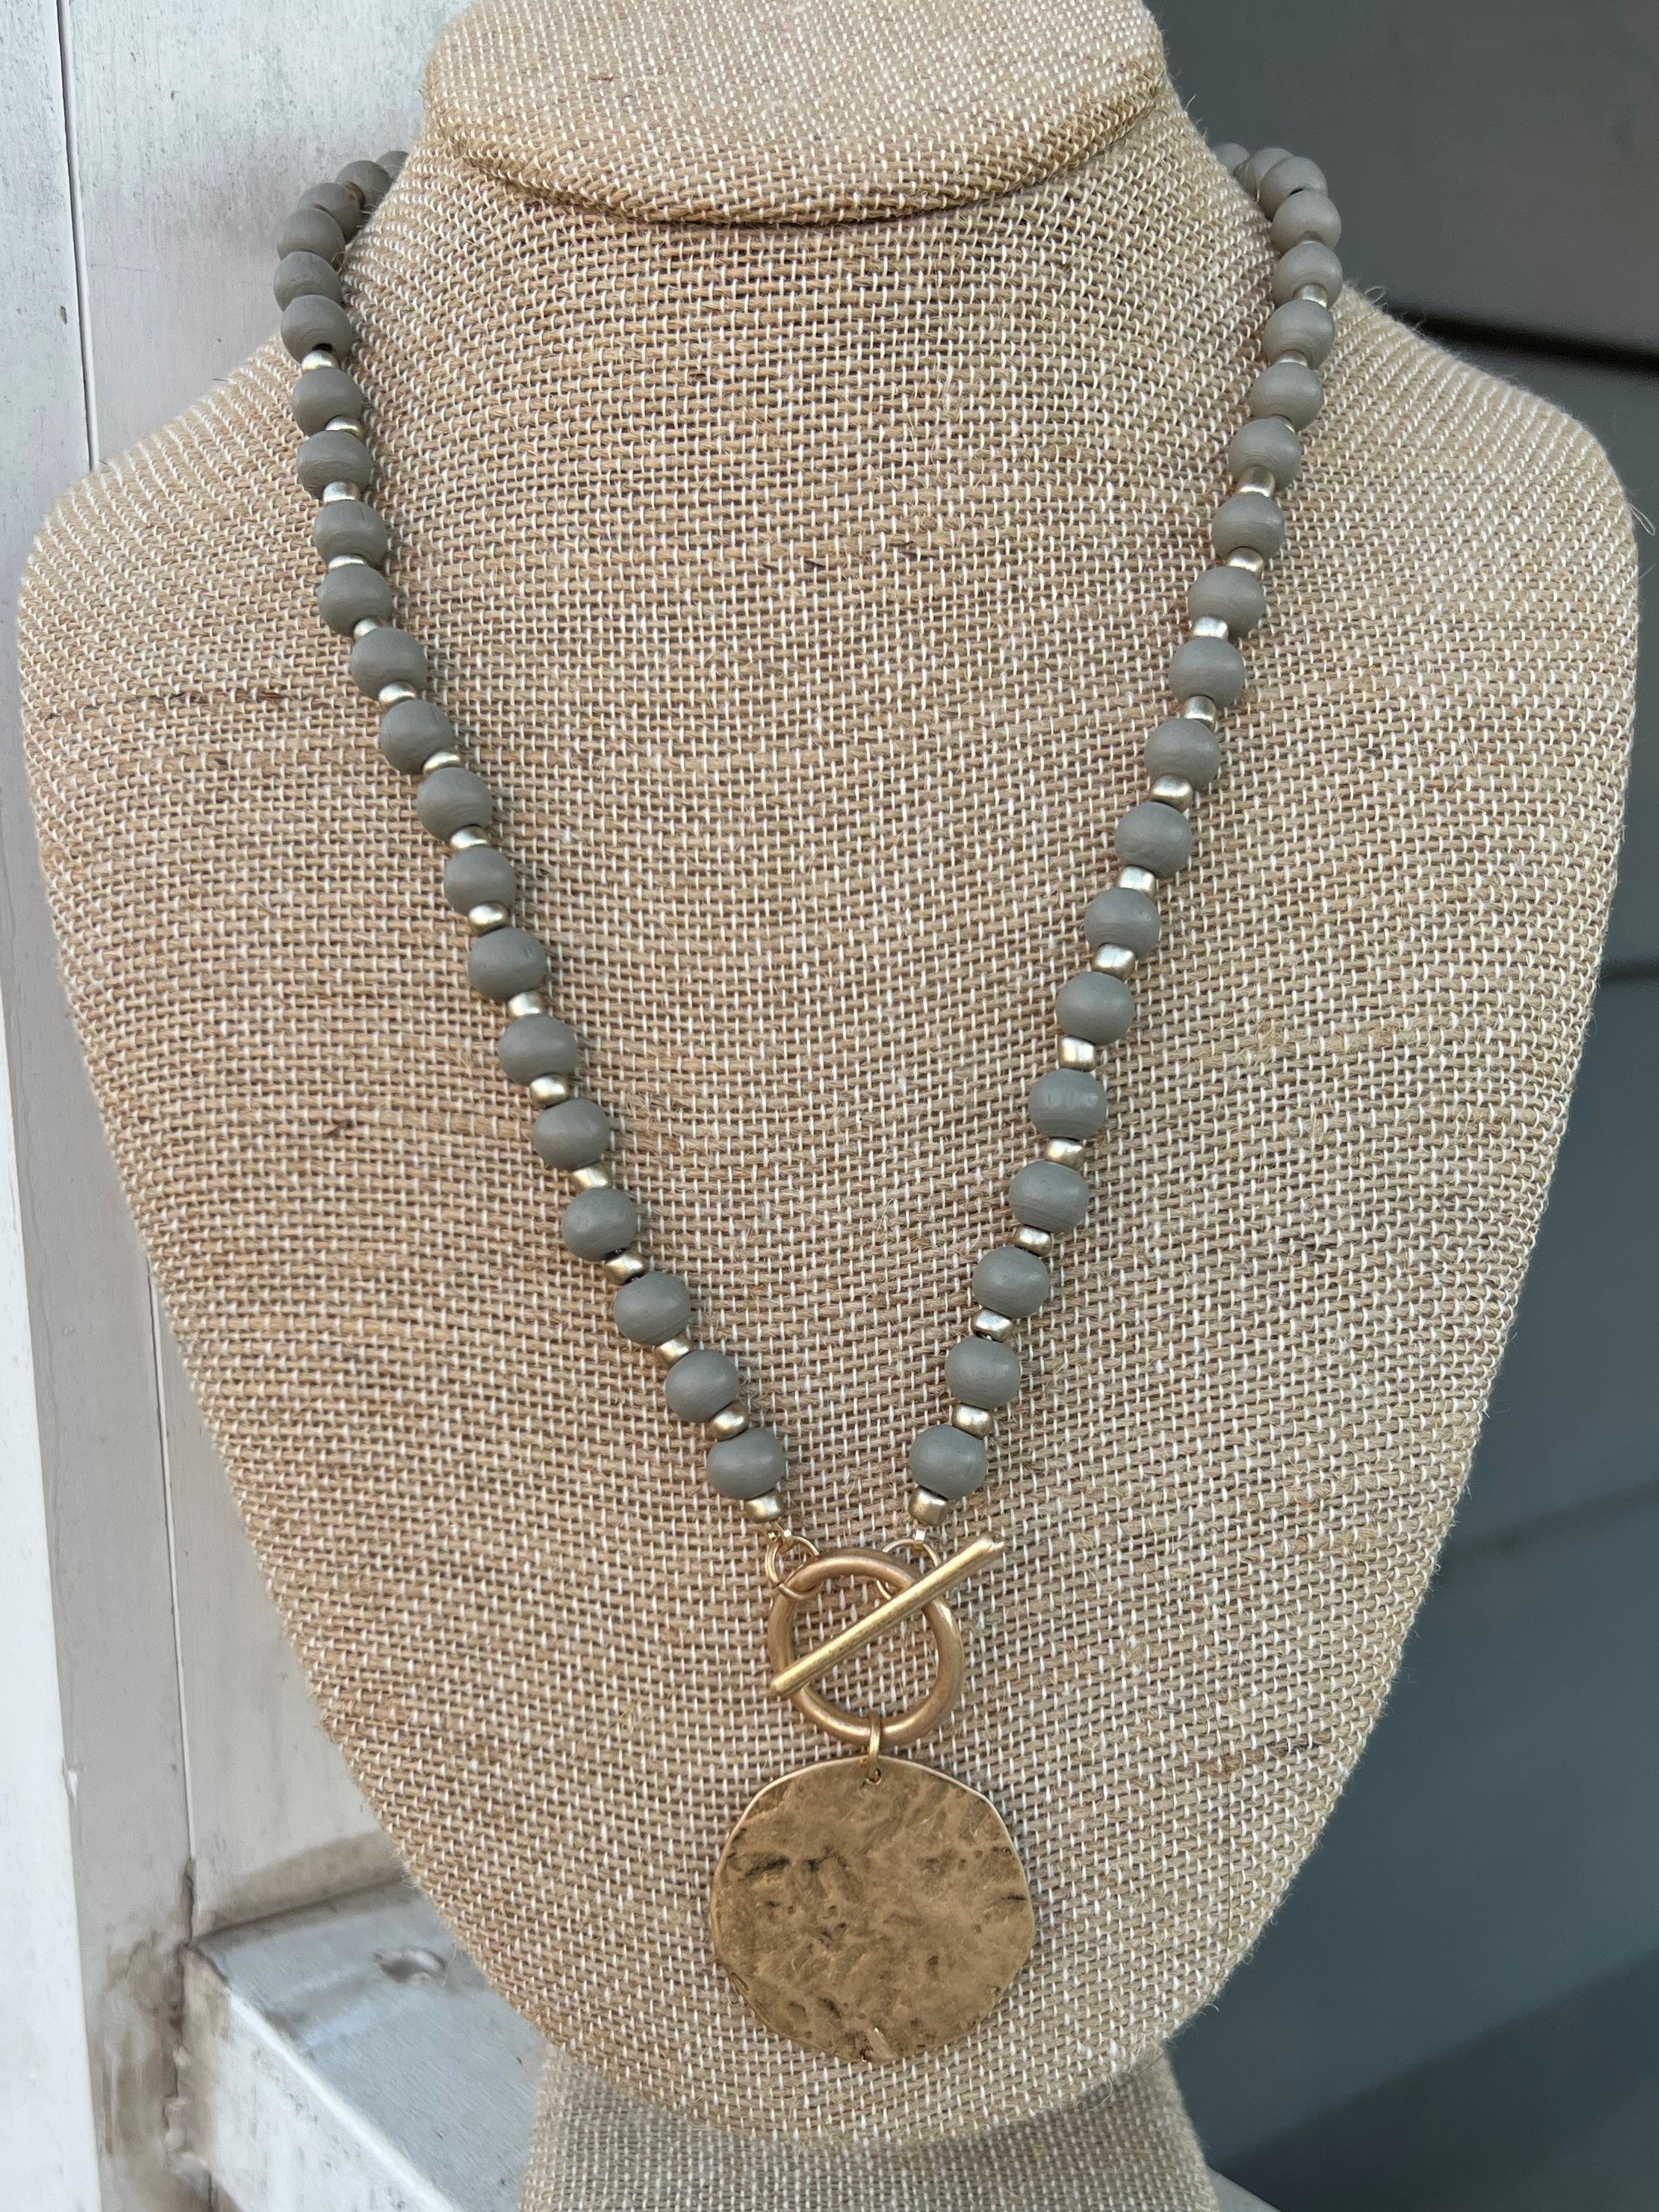 We love these wood beaded necklaces that add a little bit of dimension! They are topped off by the beautiful hammered gold coin charm. The necklace is approximately 20-23" in length and the gold charm is approximately 1.25" in diameter. This necklace will look great with your favorite cozy sweater or a lovely sleek dress - this necklace is so versatile!